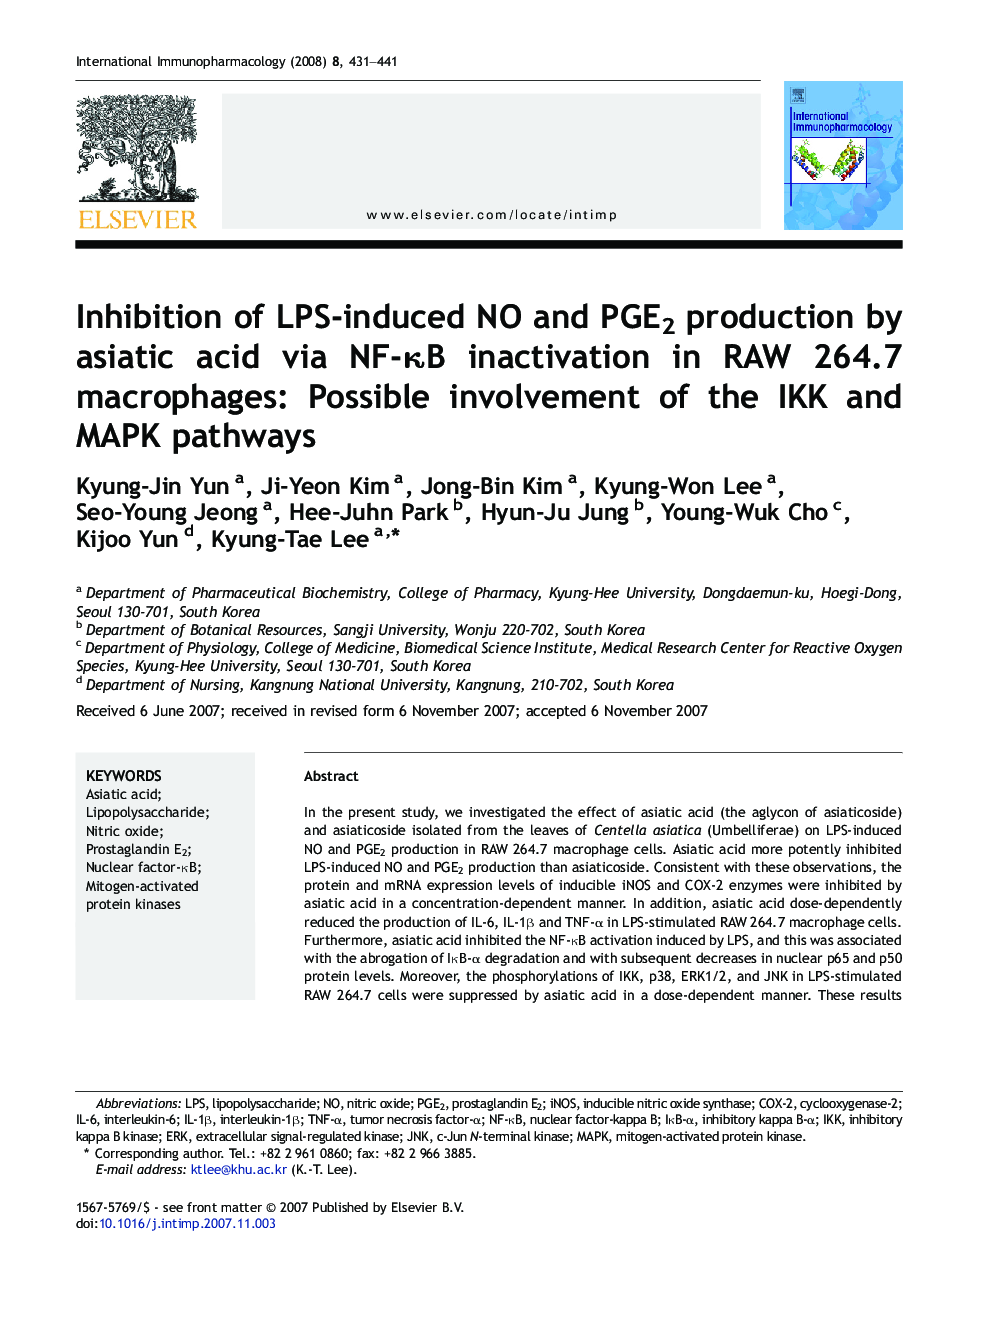 Inhibition of LPS-induced NO and PGE2 production by asiatic acid via NF-κB inactivation in RAW 264.7 macrophages: Possible involvement of the IKK and MAPK pathways